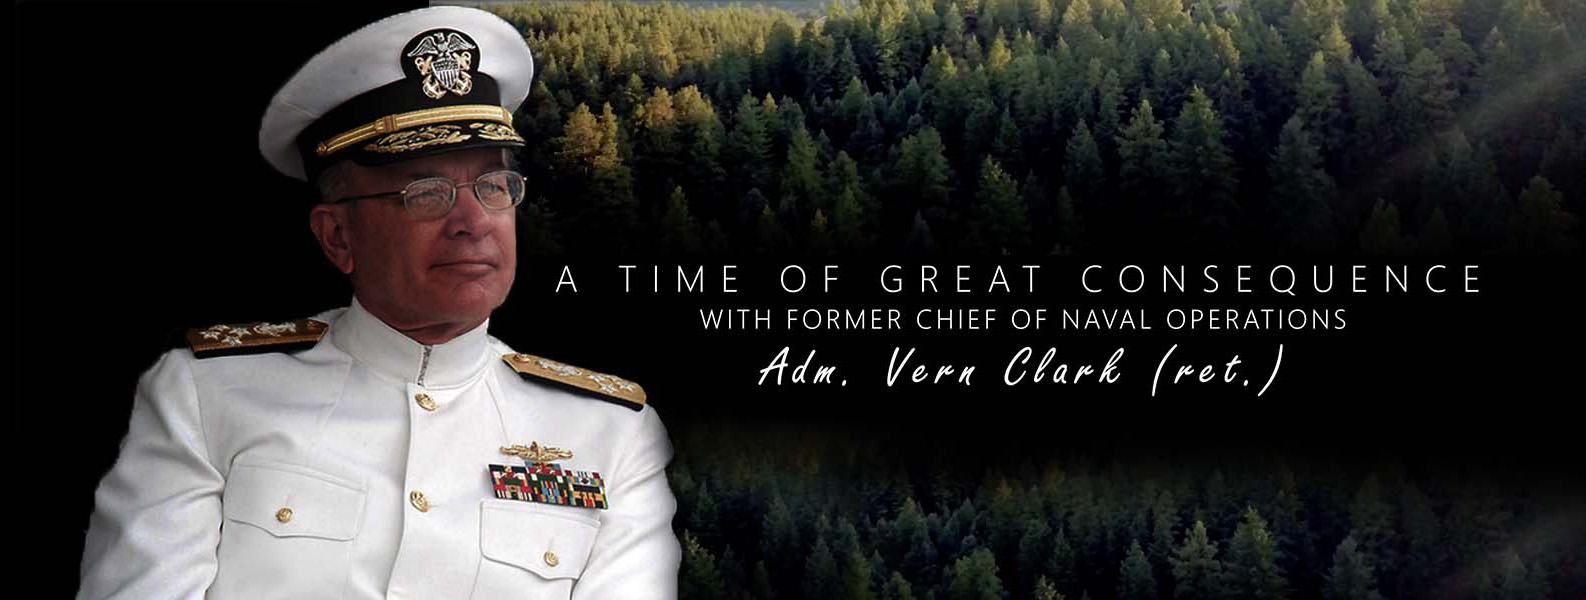 Photo of Adm Vern Clark in white sailor uniform with faded forest to black background titled A Time of Great Consequence with following subtitle, with former Chief of Naval Operations